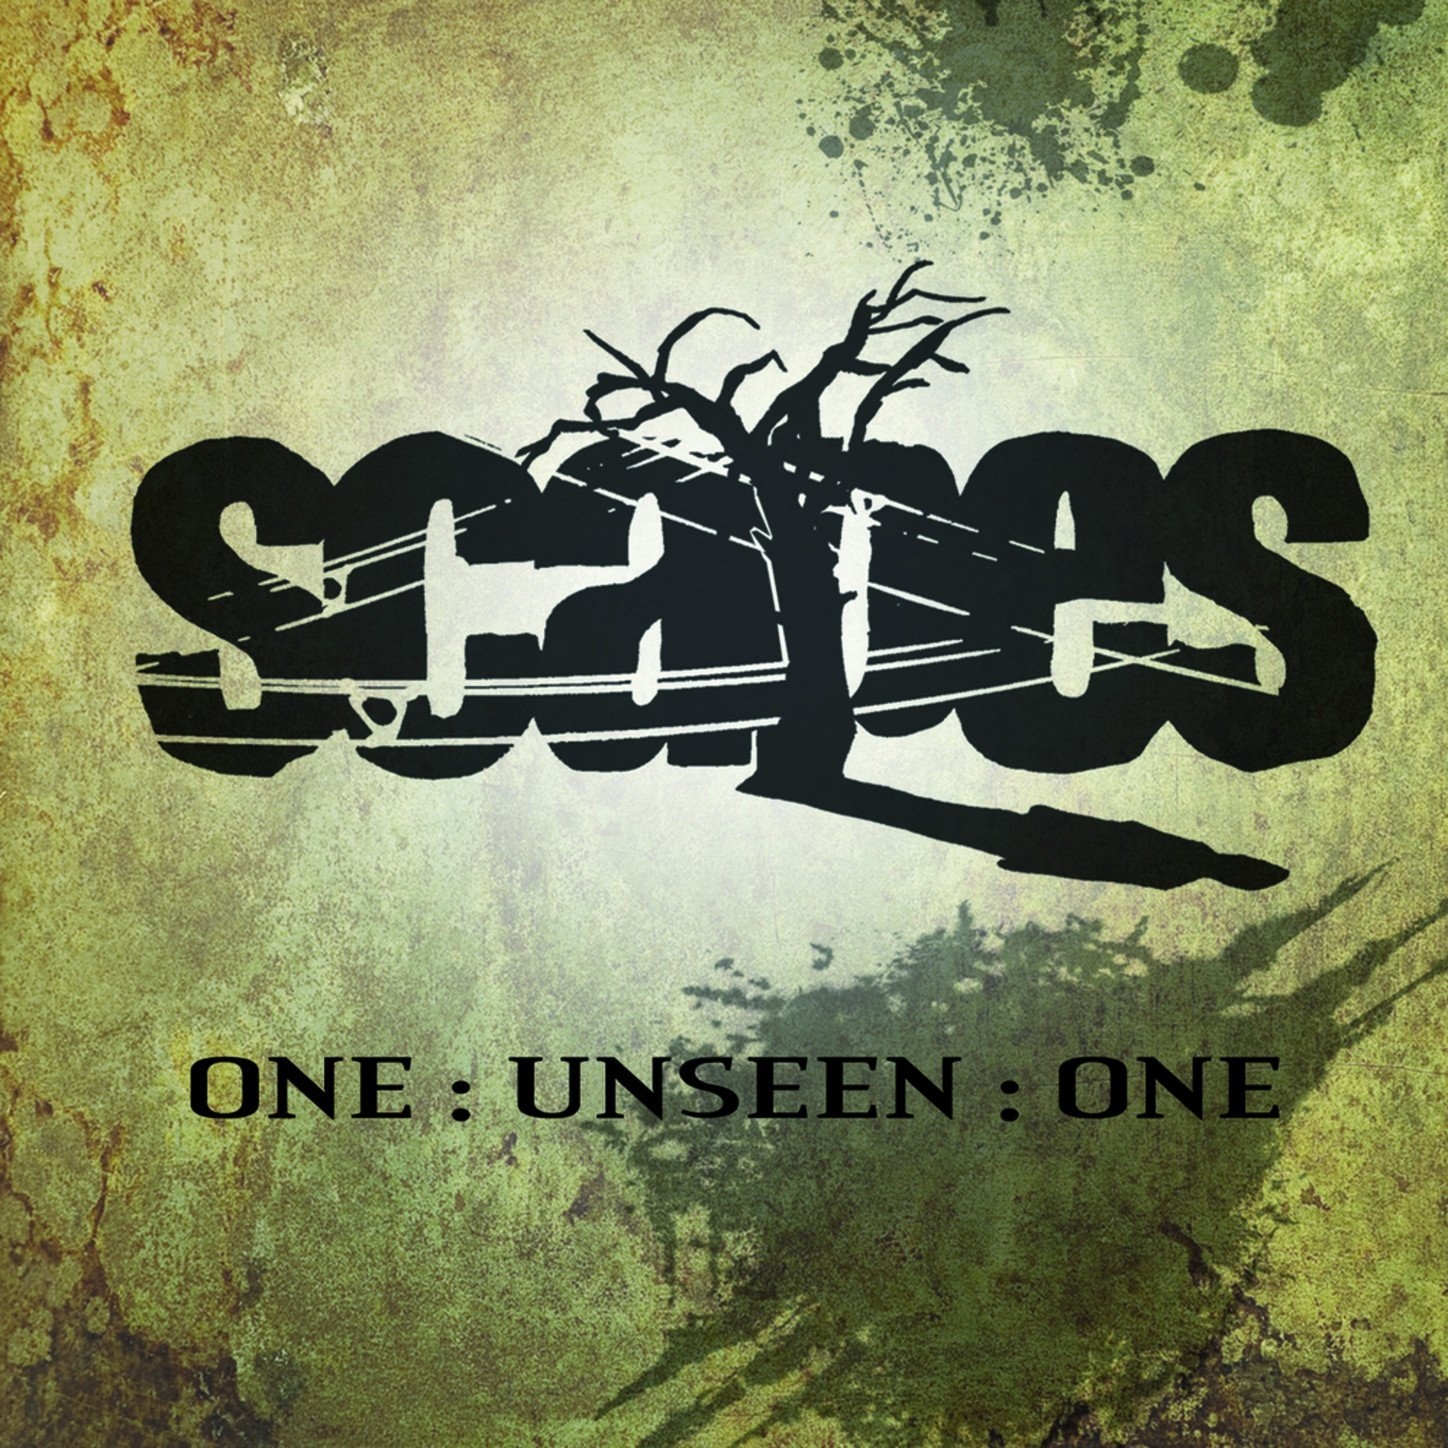 Scapes – One: Unseen: One Review